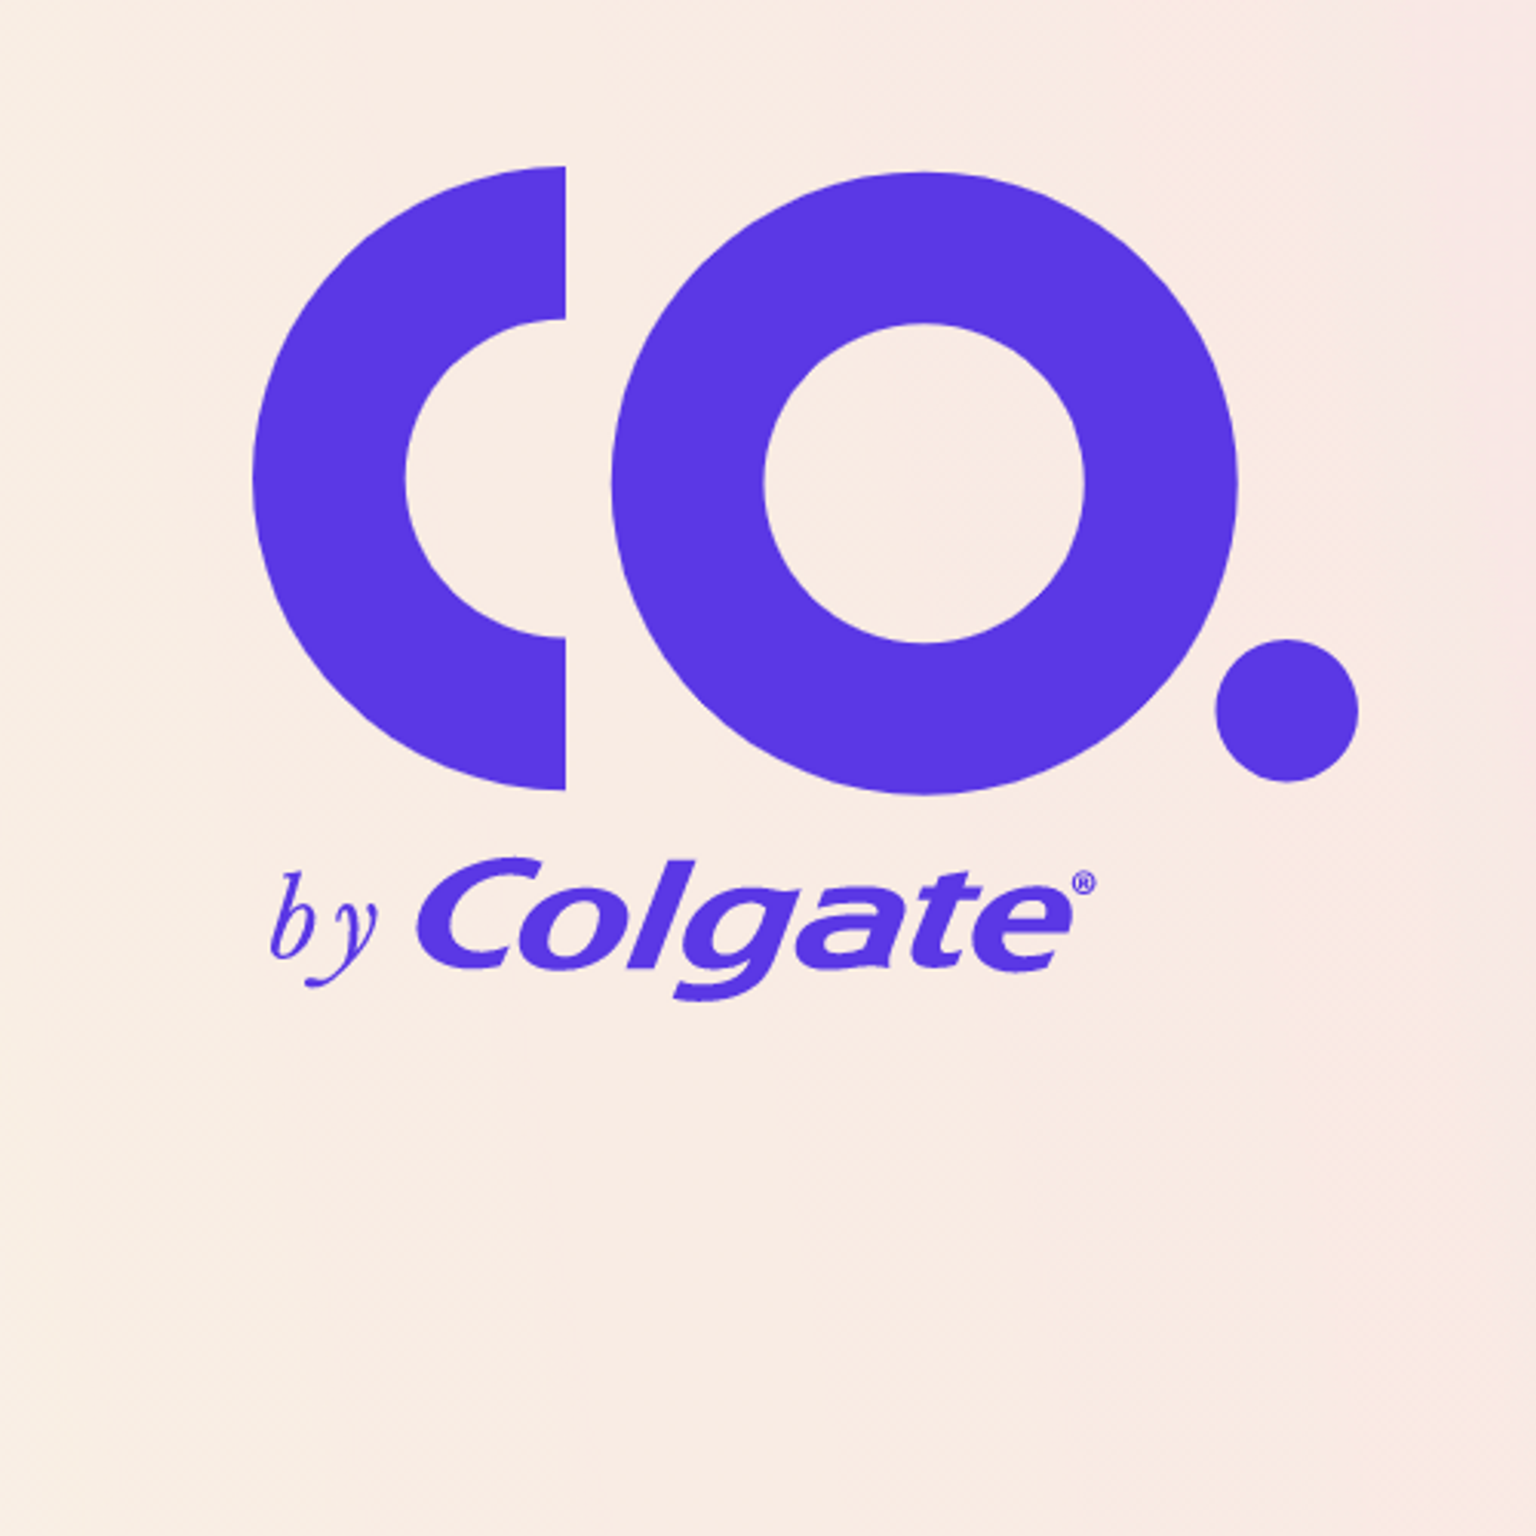 CO. by Colgate logo on beige background